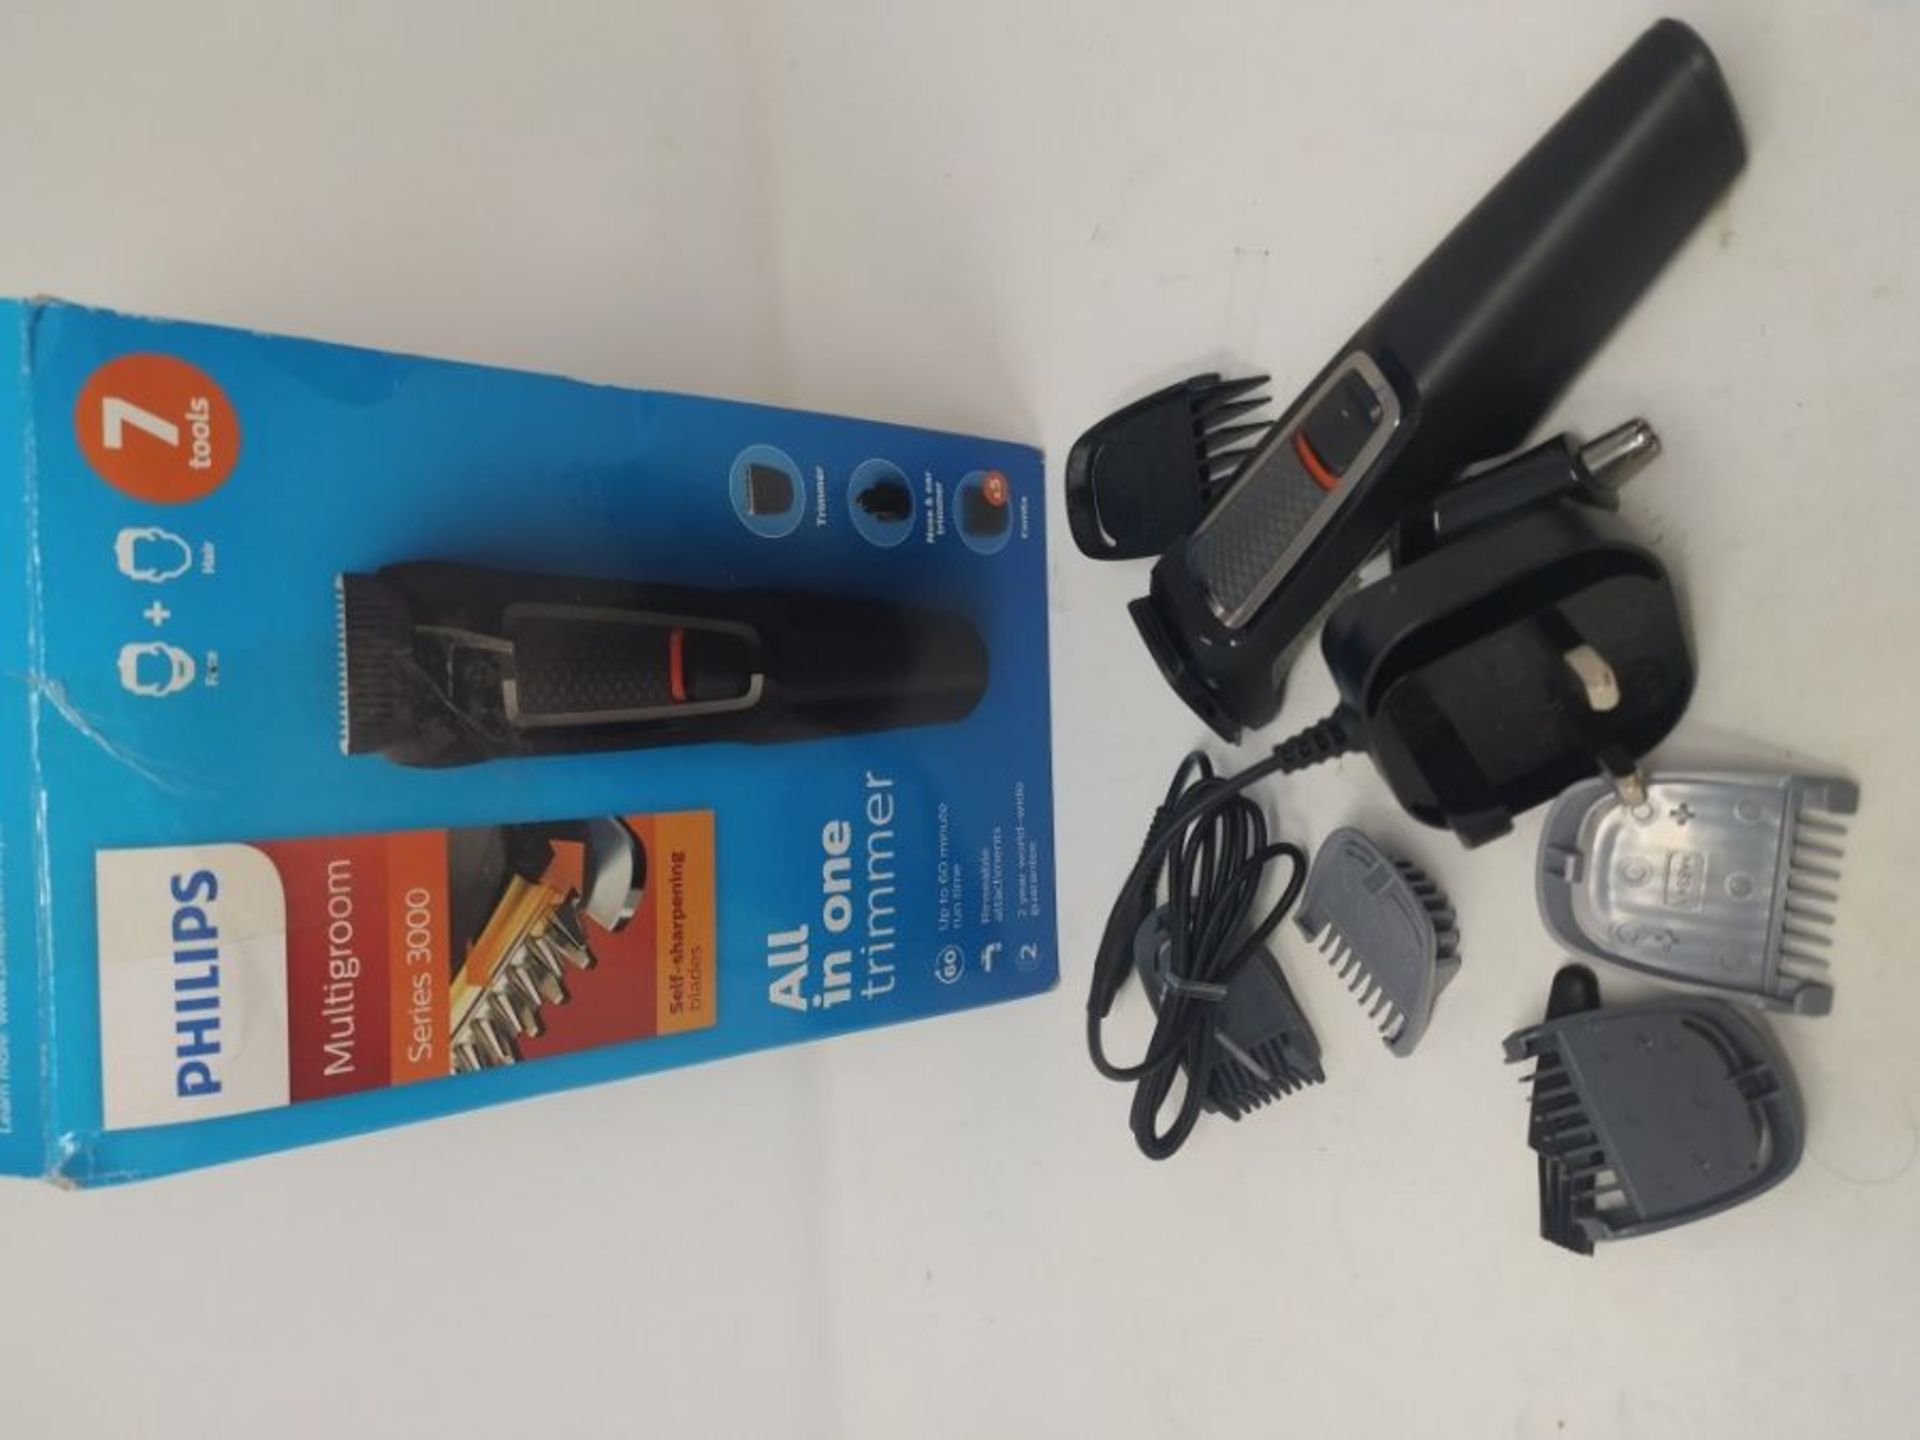 Philips 7-in-1 All-In-One Trimmer, Series 3000 Grooming Kit, Beard Trimmer and Hair Cl - Image 2 of 2